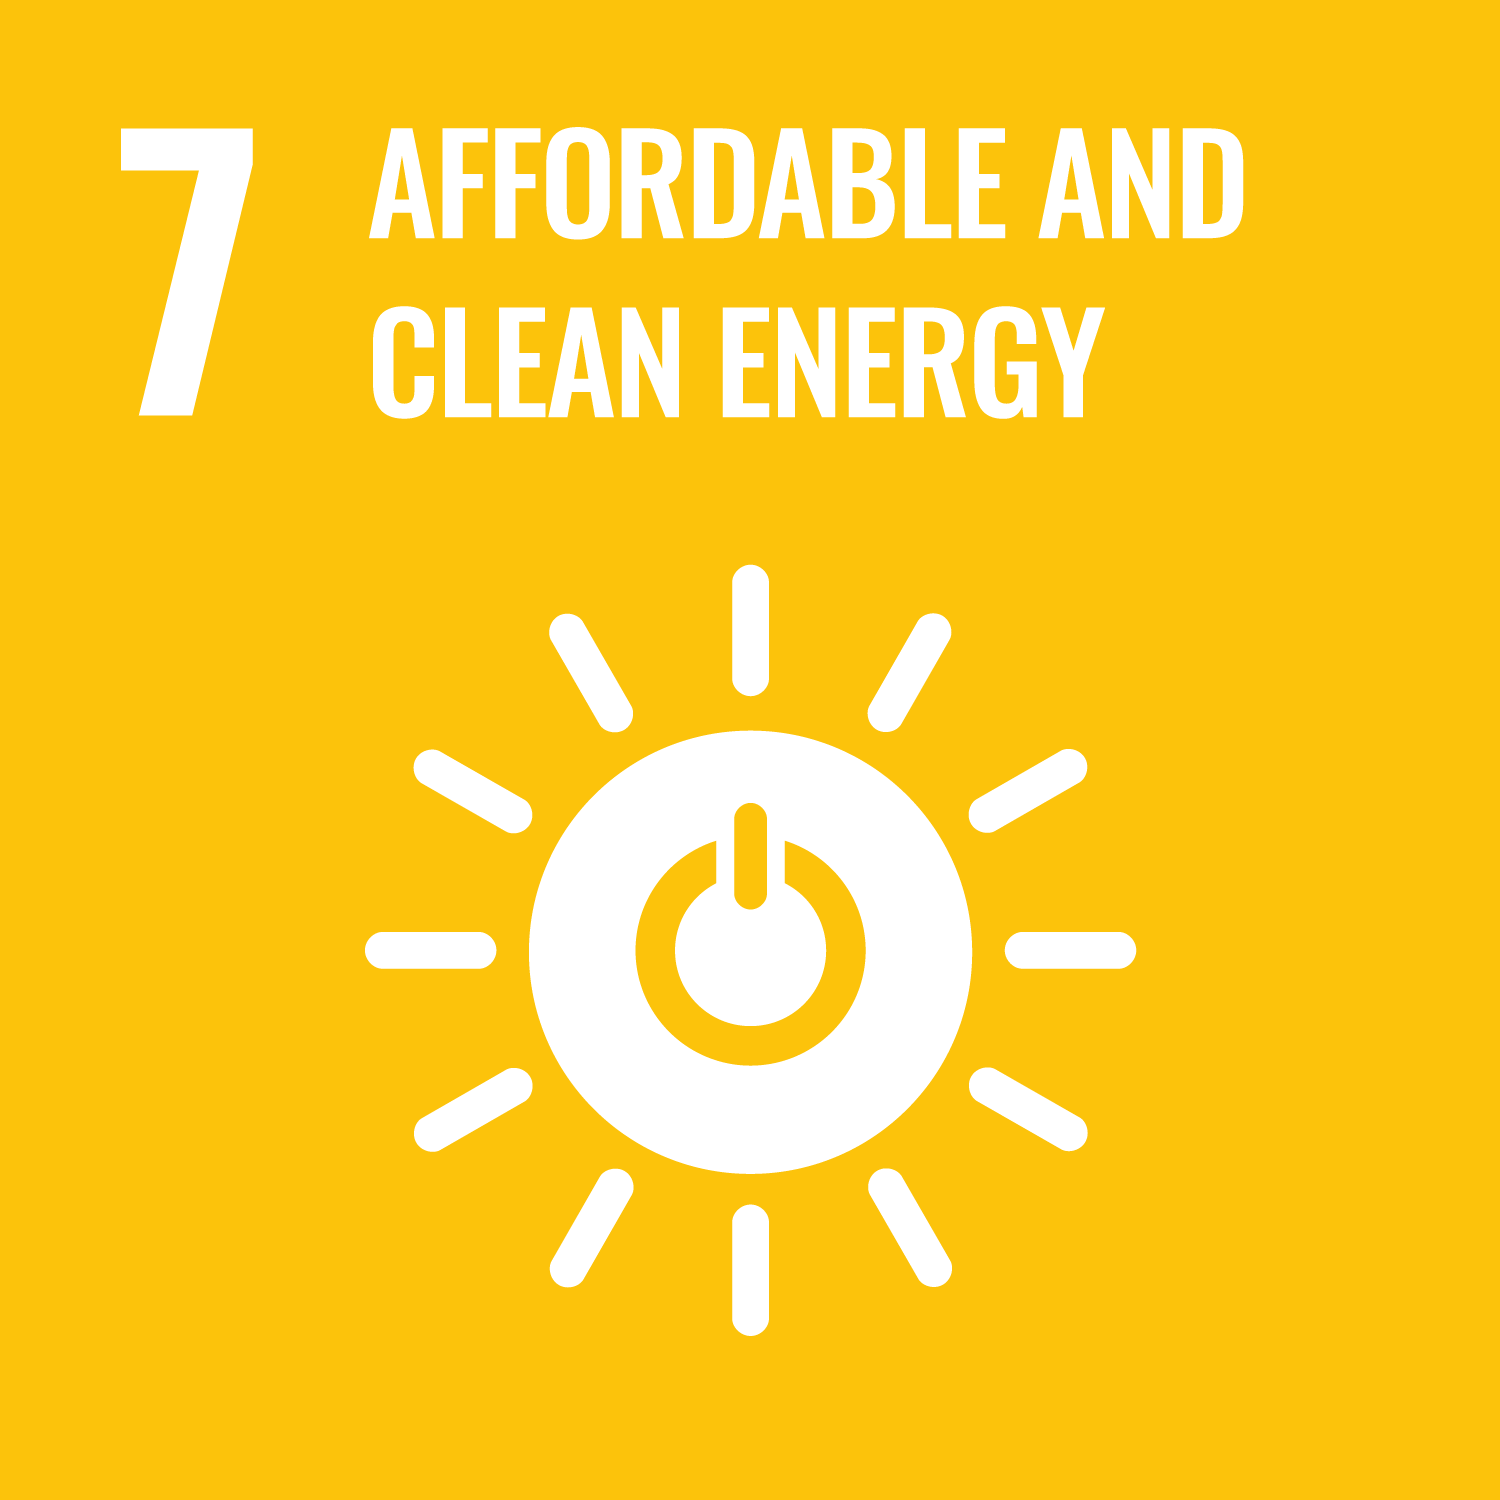 07-AFFORDABLE &CLEAN ENERGY